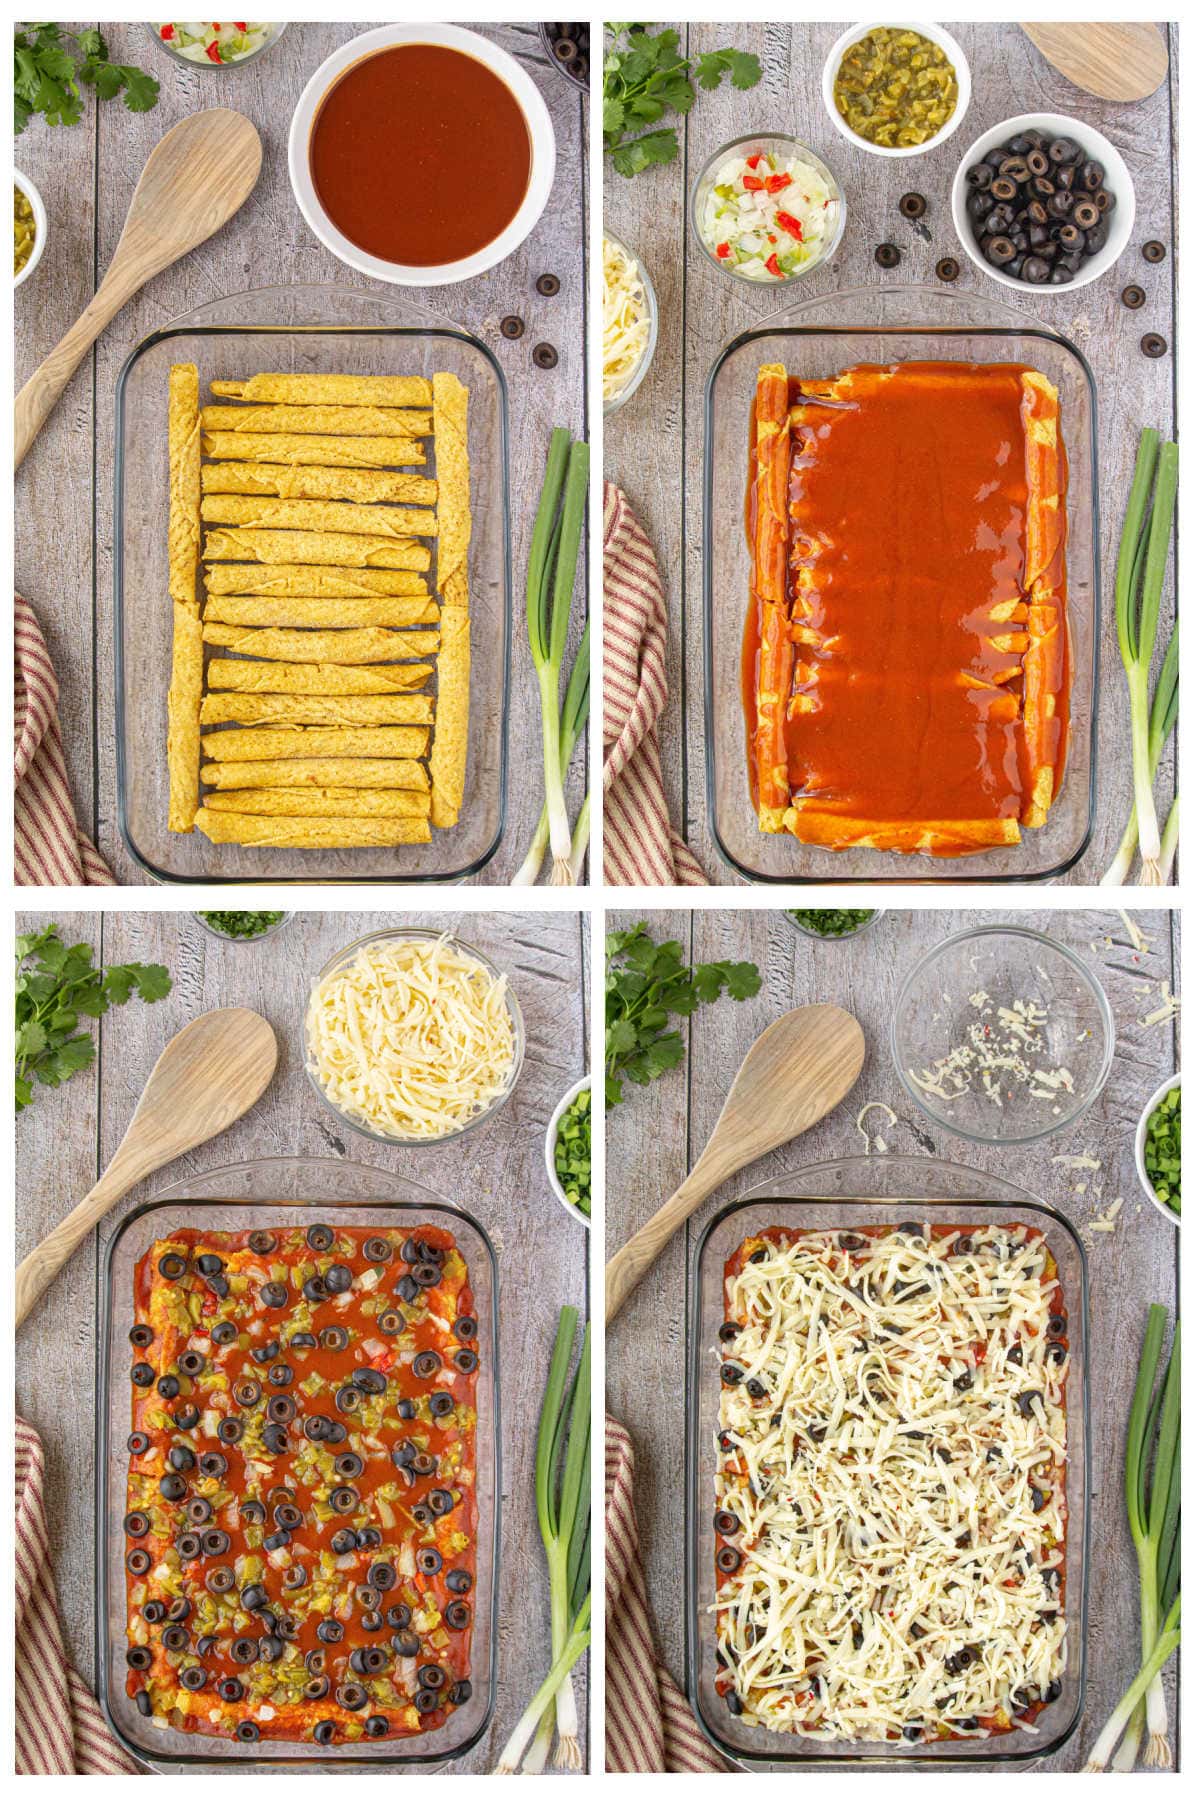 Step by step images showing how to make taquito casserole.